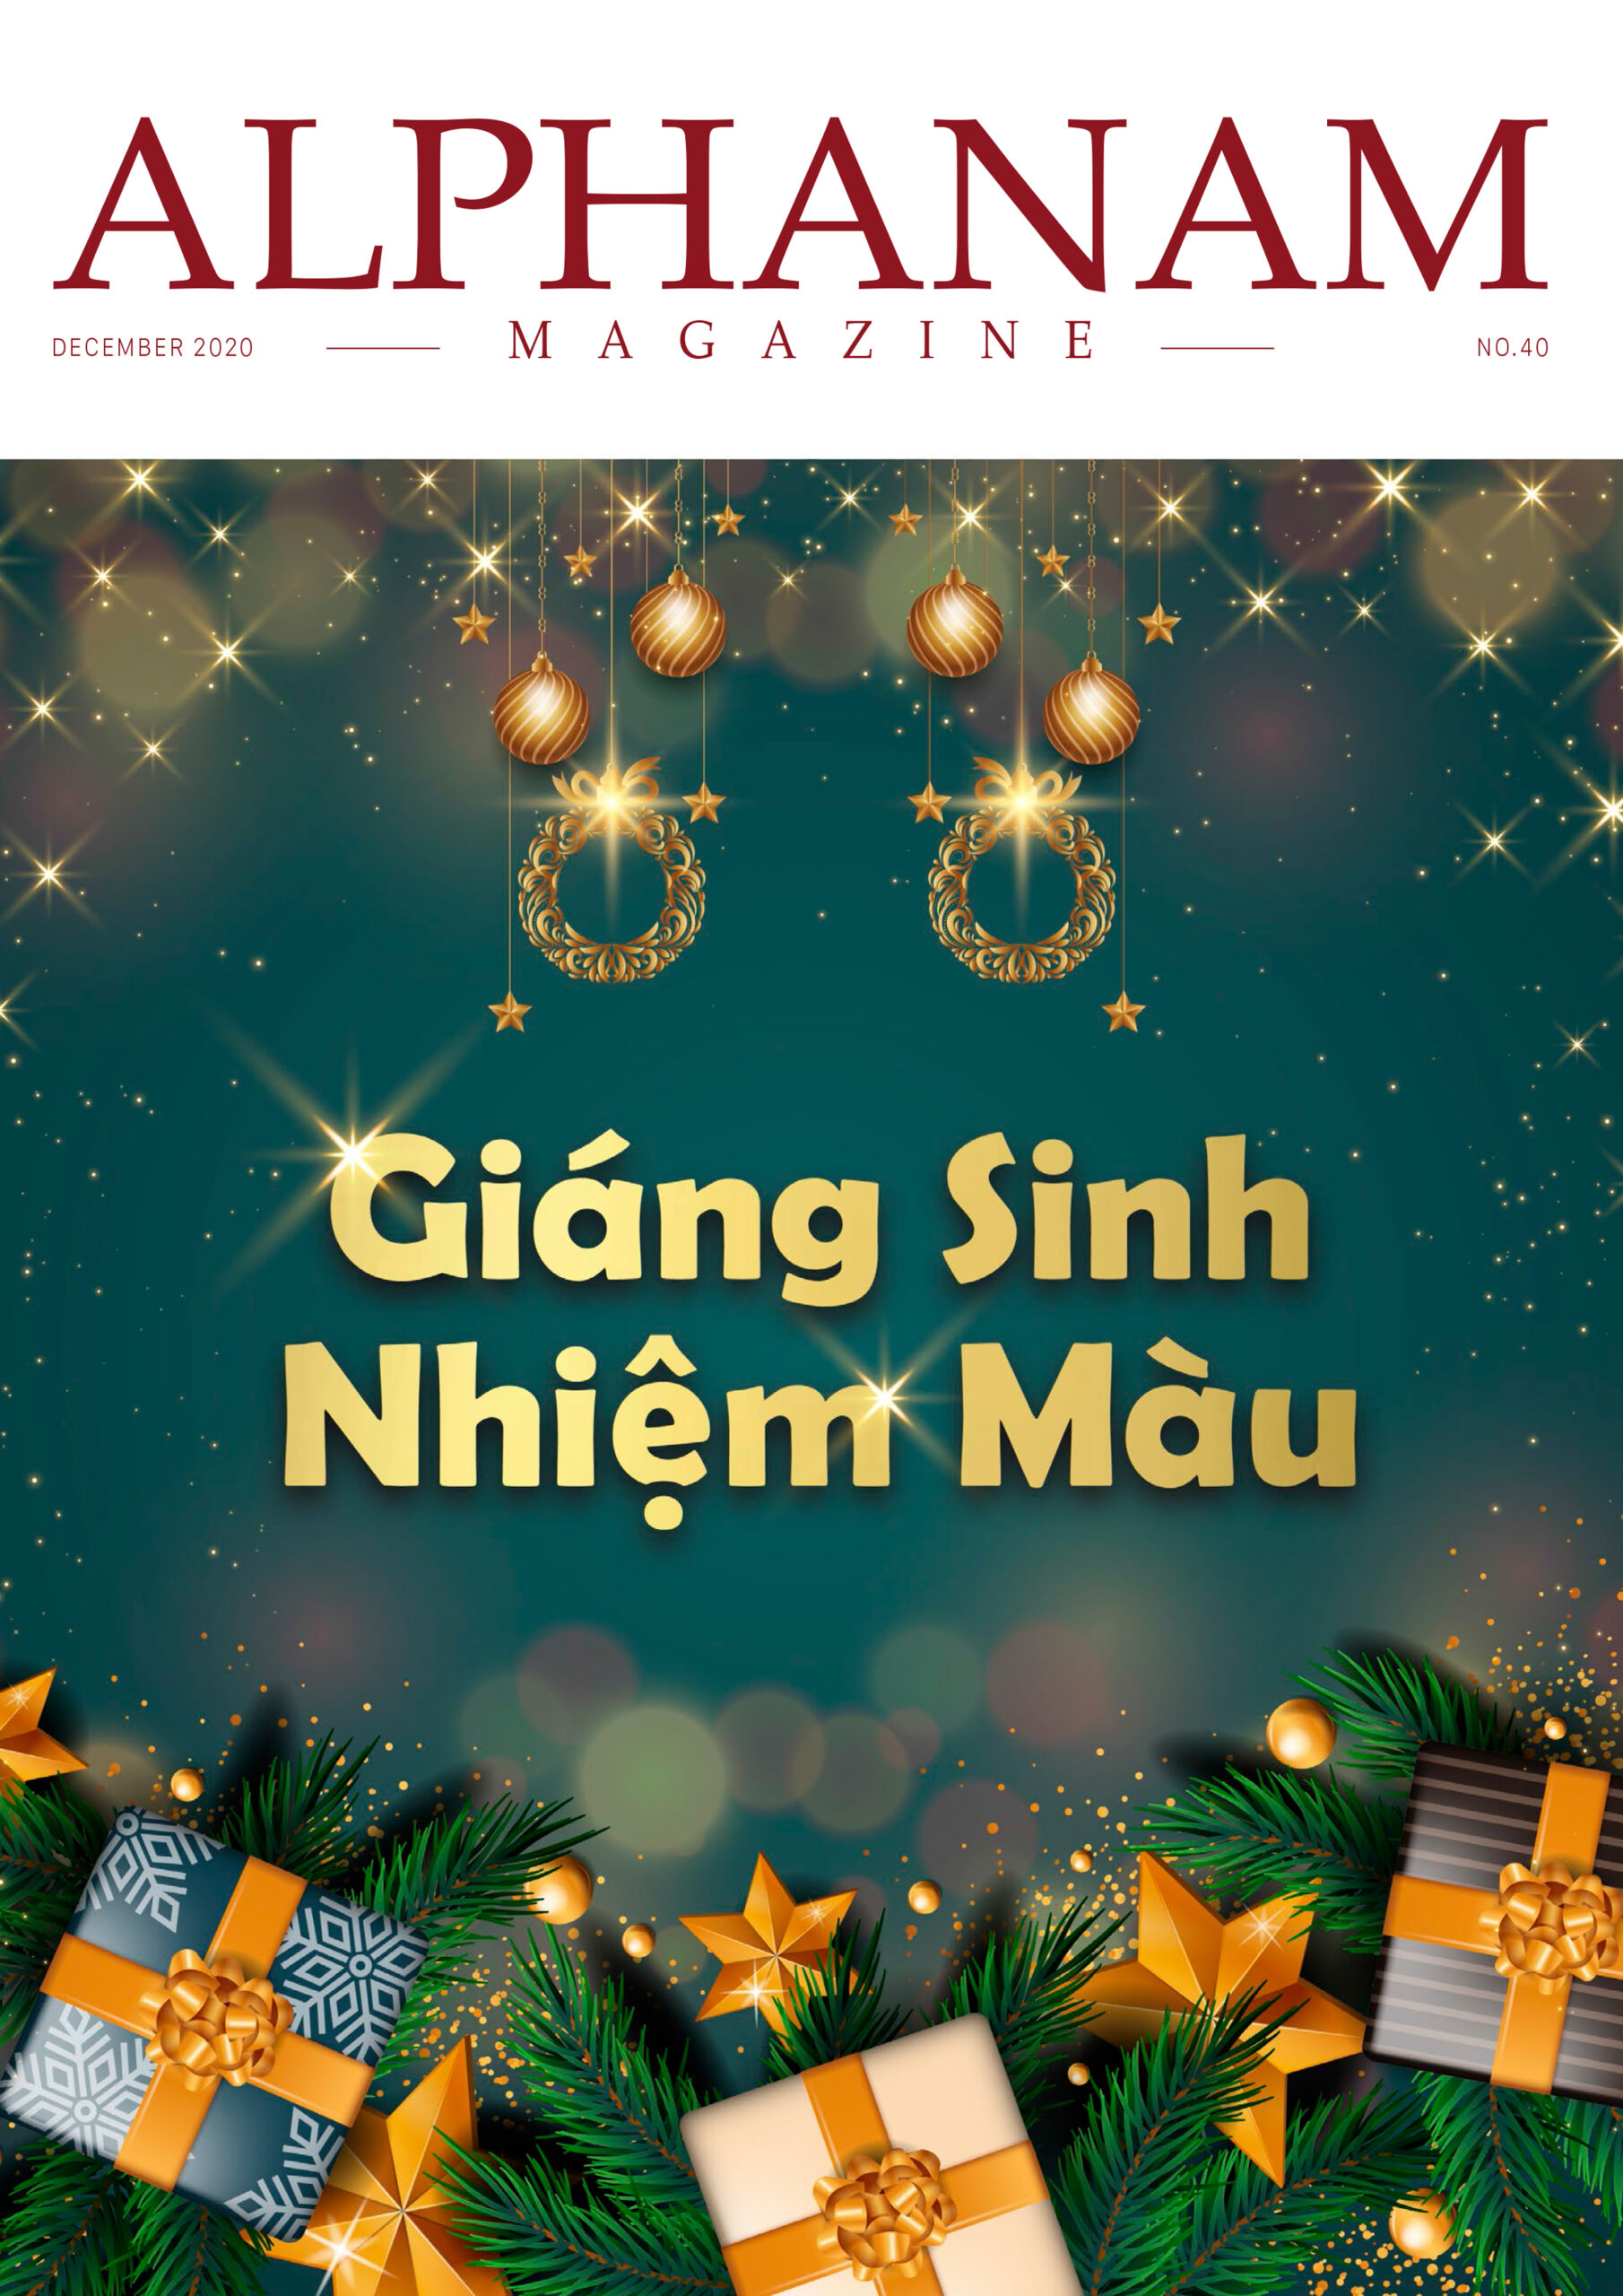 Read more about the article No.40: GIÁNG SINH NHIỆM MÀU